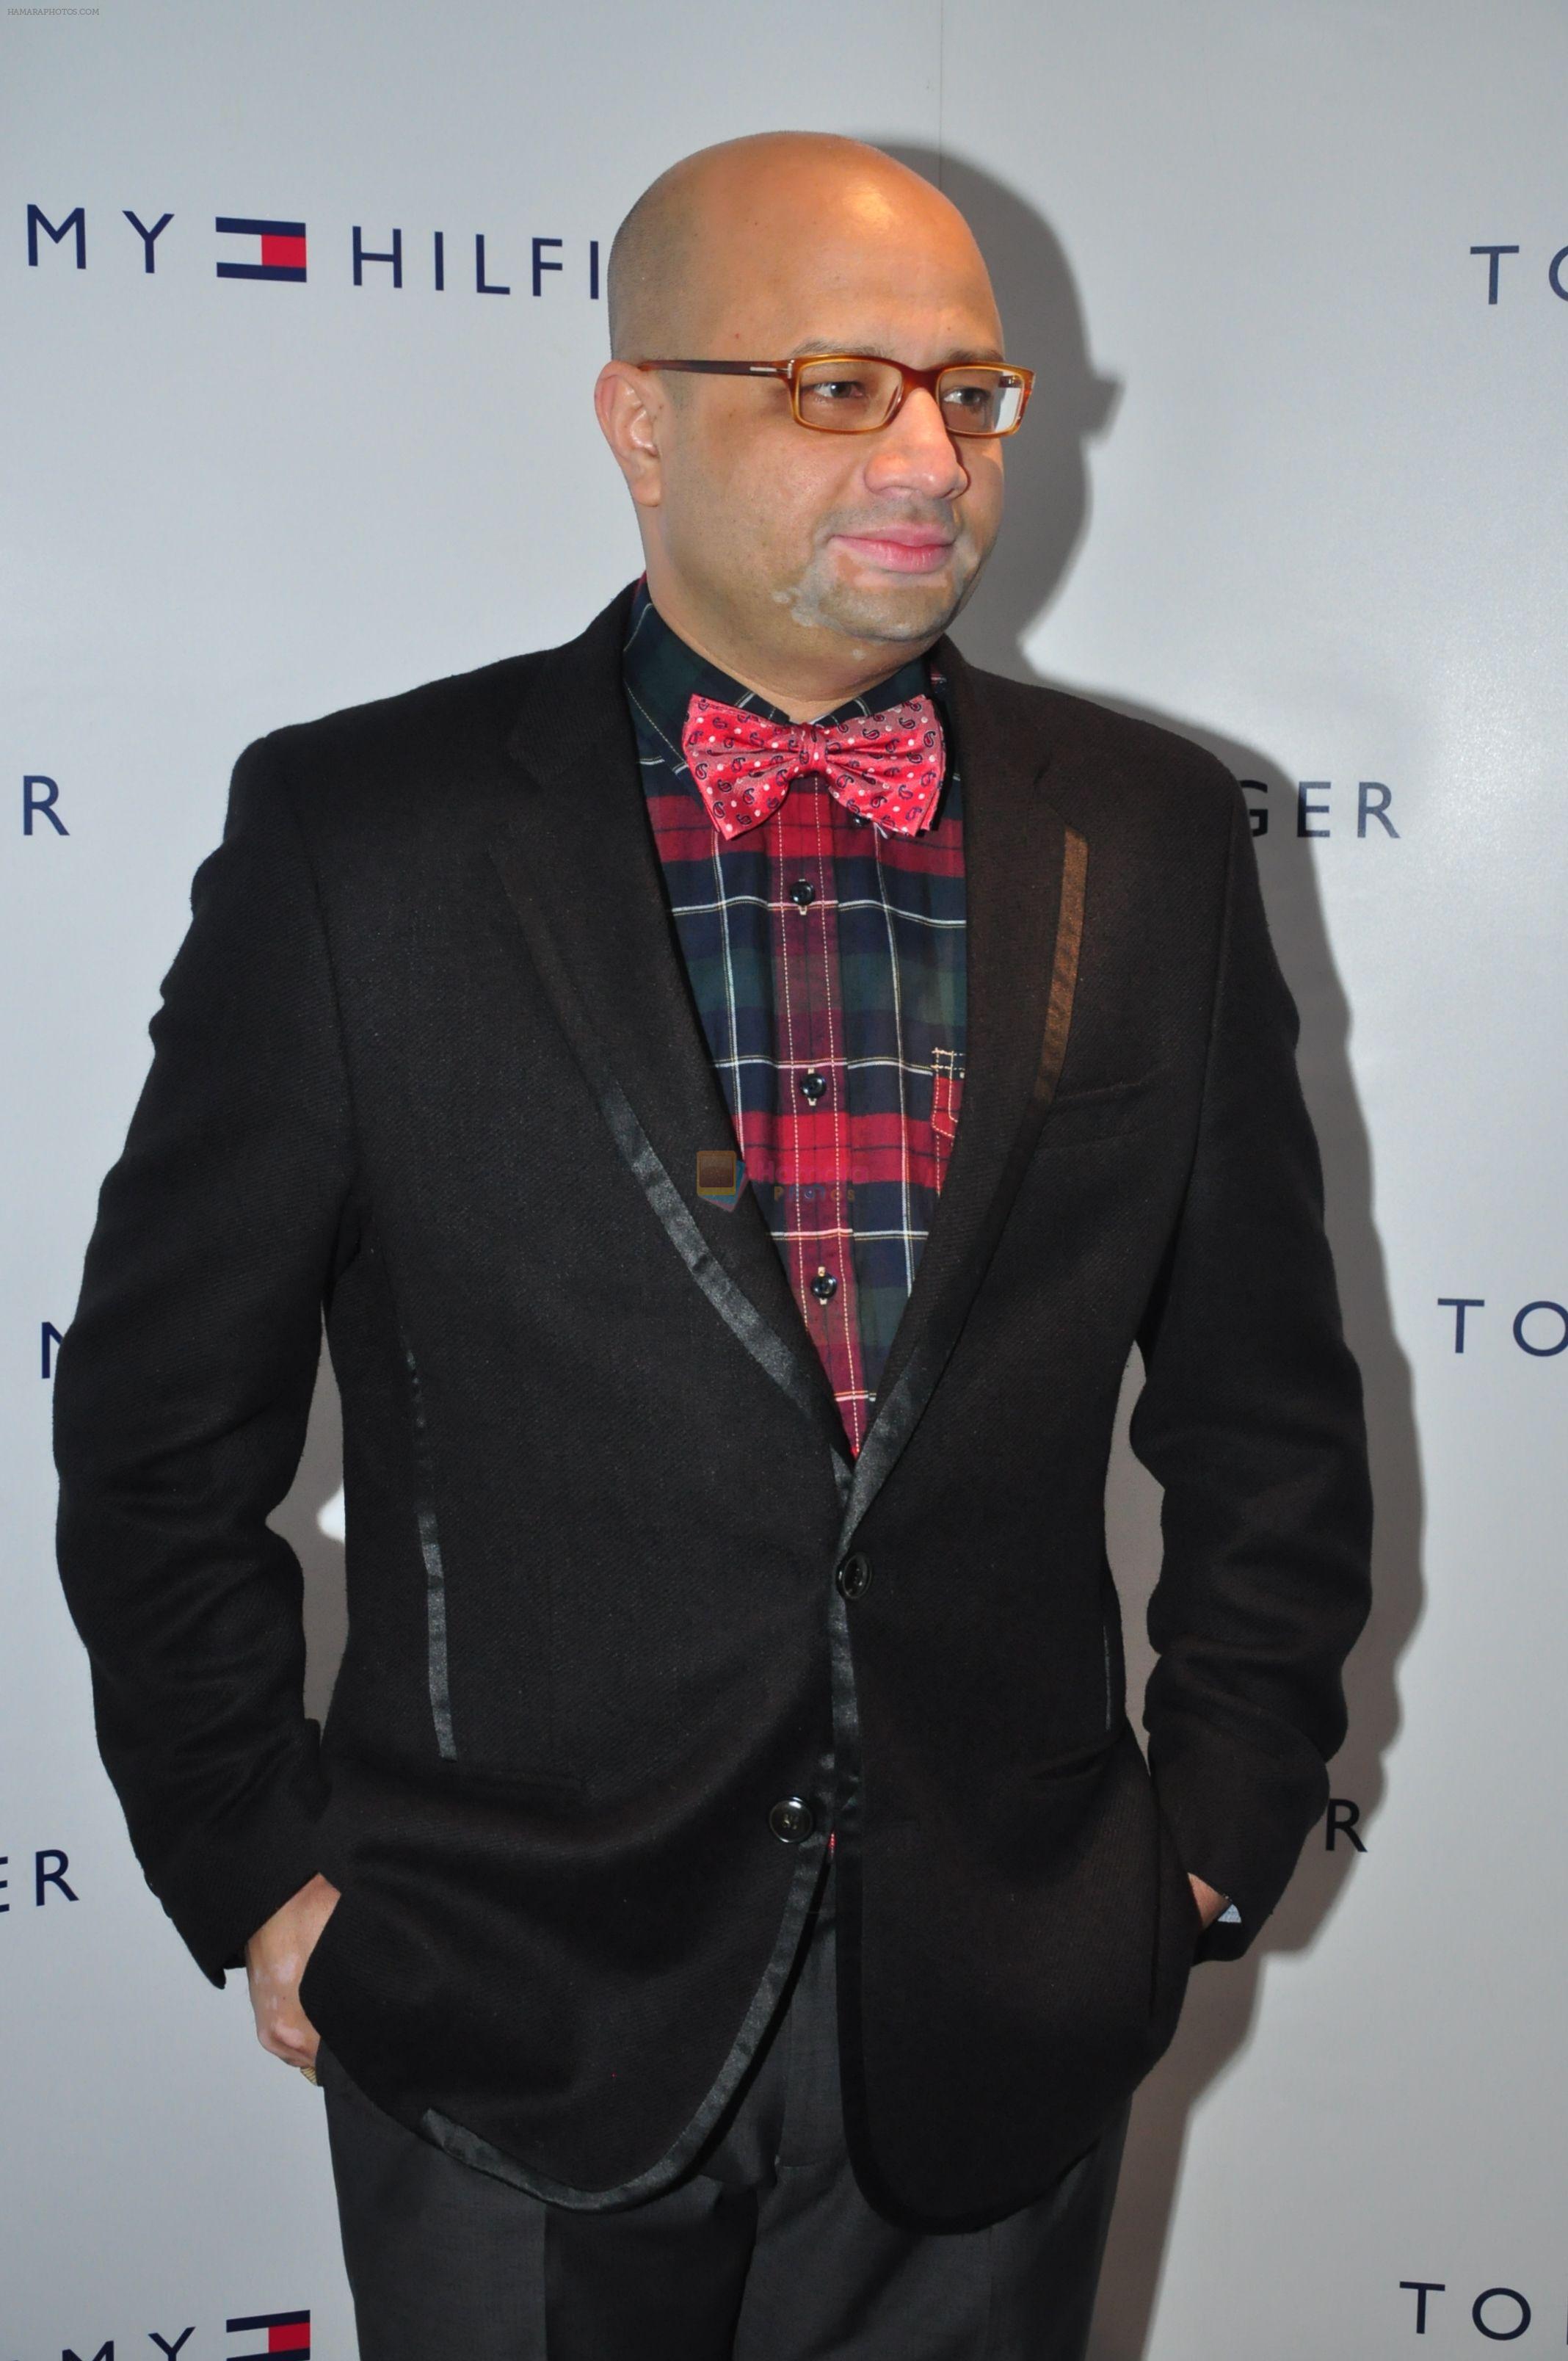 Tommy Hilfiger Showroom Relaunch Party held at Kismet Pub, Park Hotel, Hyderabad on 17th September 2011